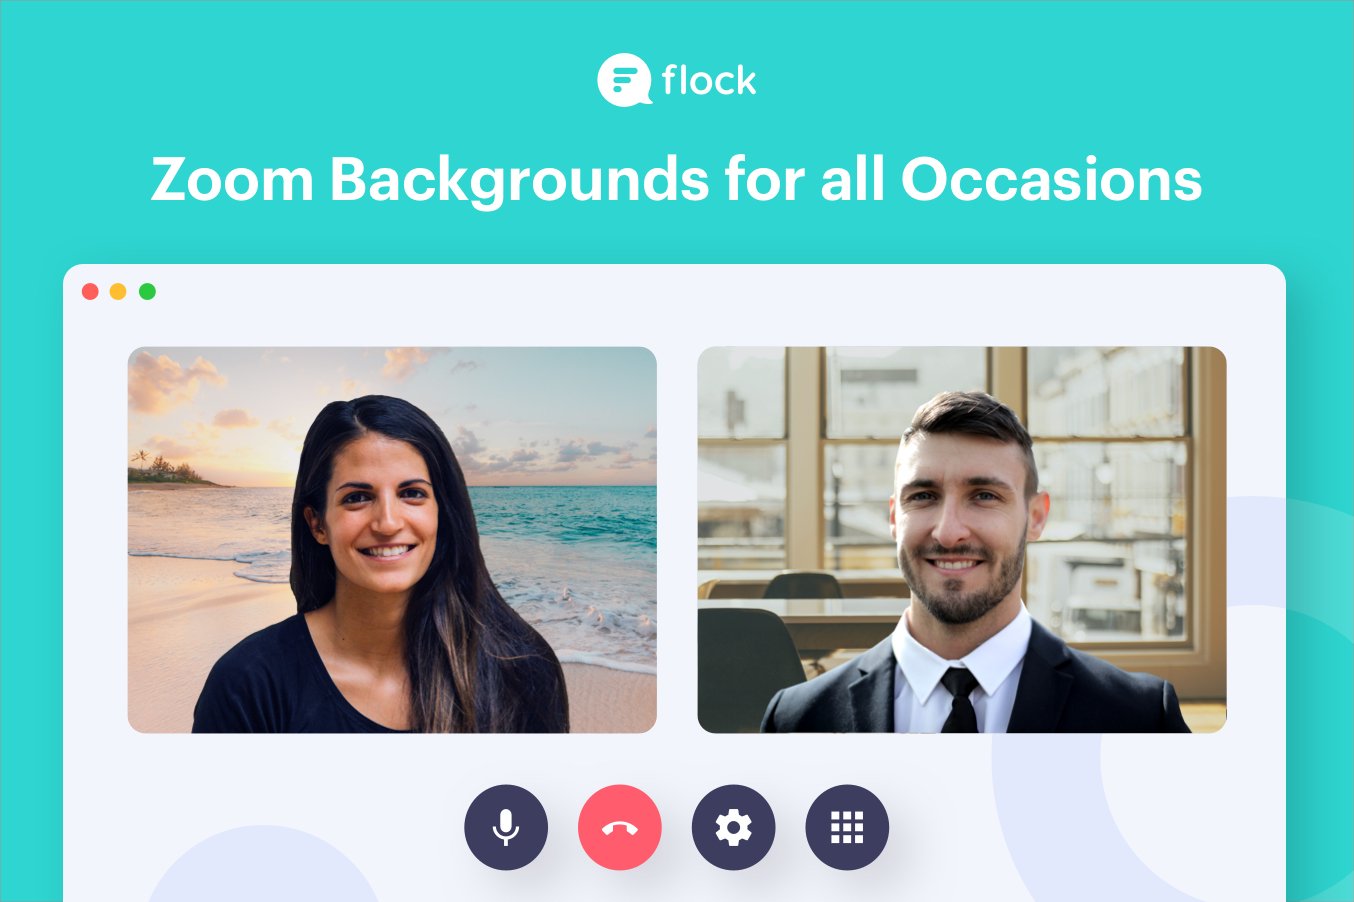 Creative virtual backgrounds for professional (and fun) Zoom calls